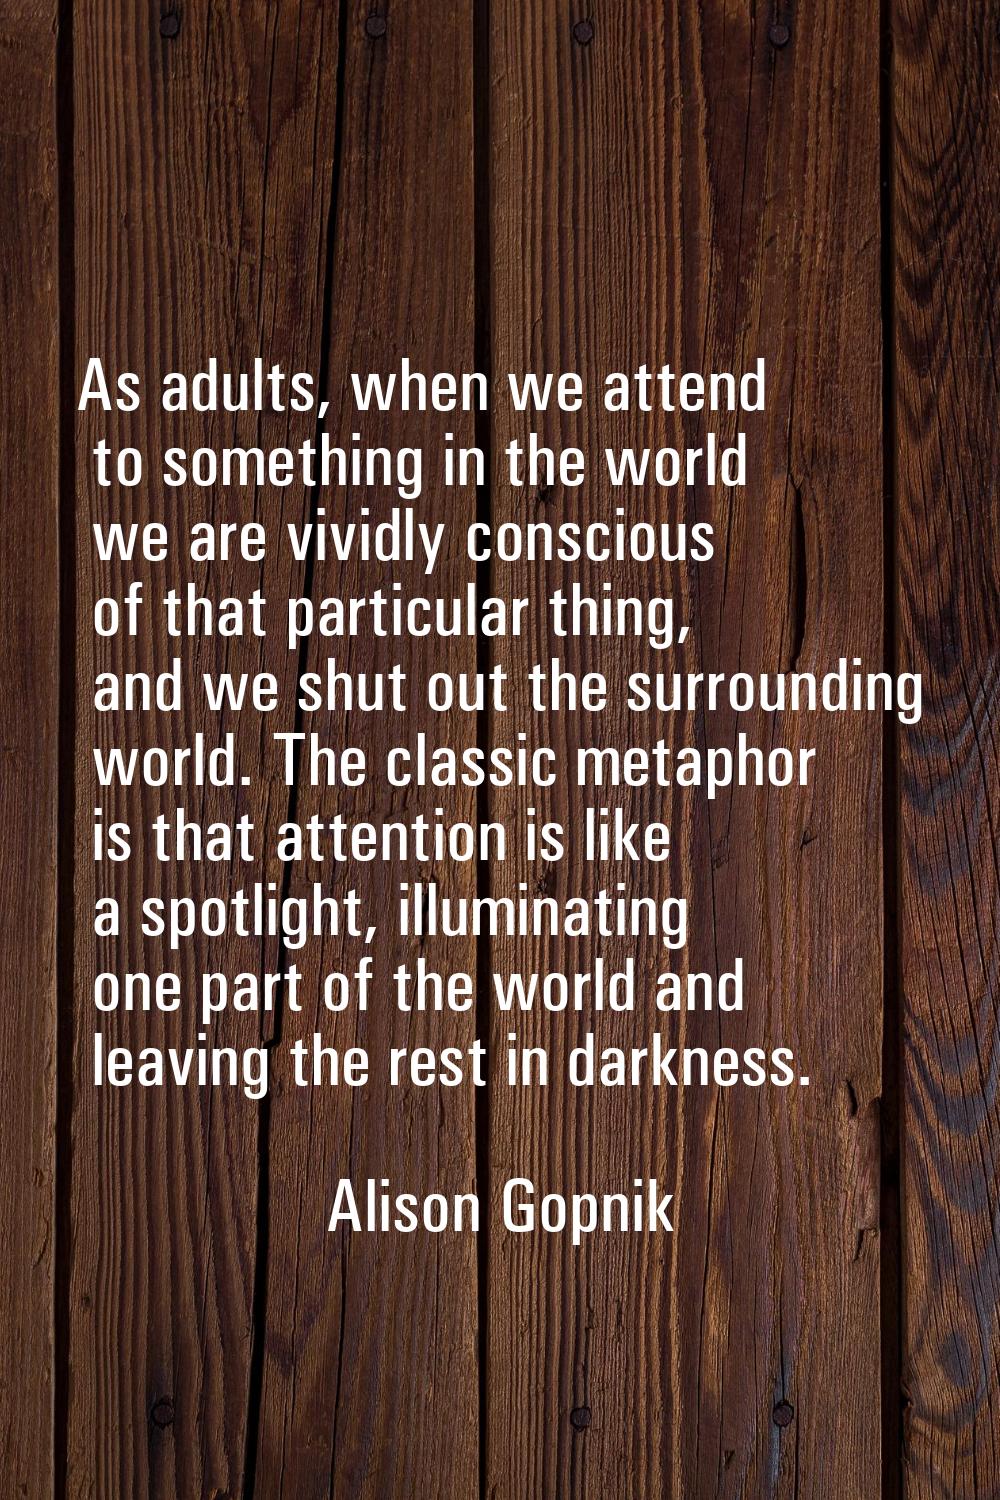 As adults, when we attend to something in the world we are vividly conscious of that particular thi